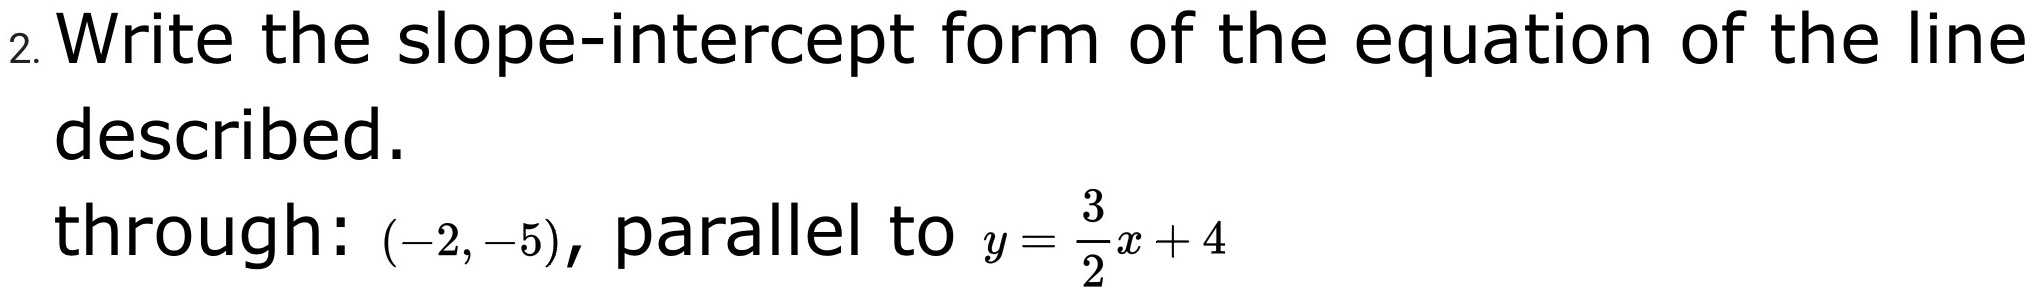 2. Write the slope-intercept form of the equation ...